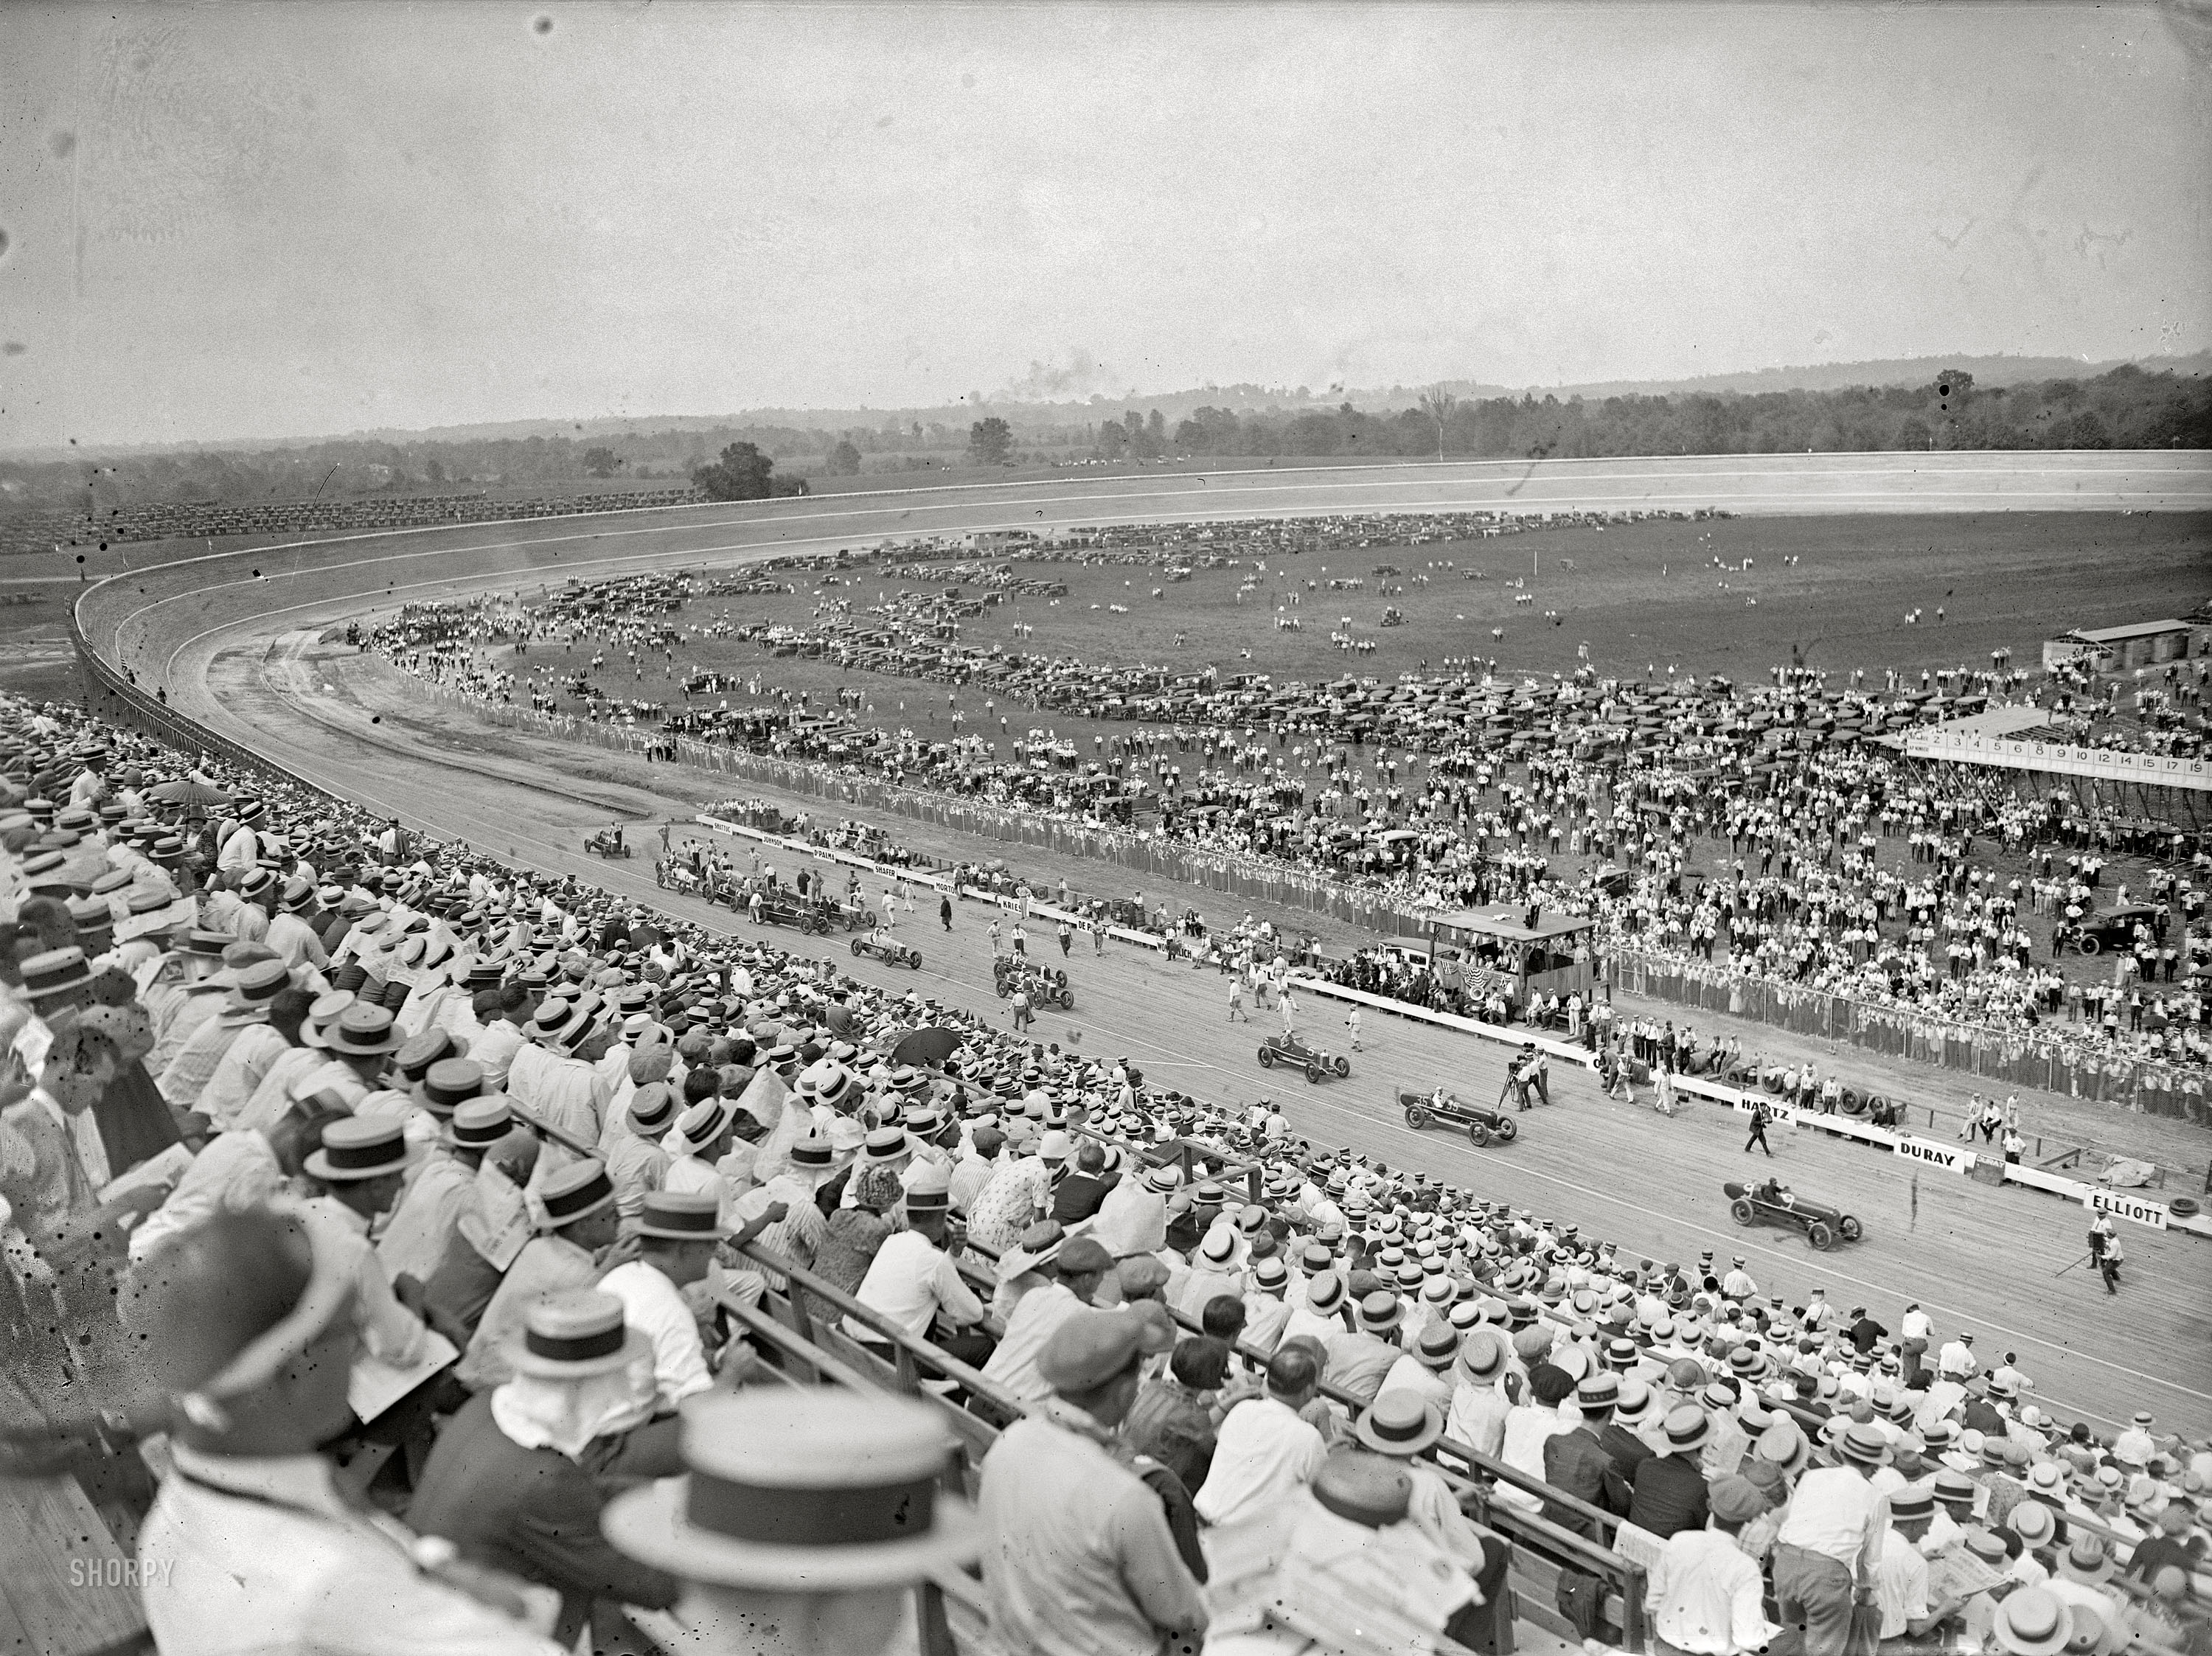 July 11, 1925. "Auto races at Laurel, Maryland." The 1&#8539;-mile wooden oval at Laurel Speedway. National Photo Company glass negative. View full size.